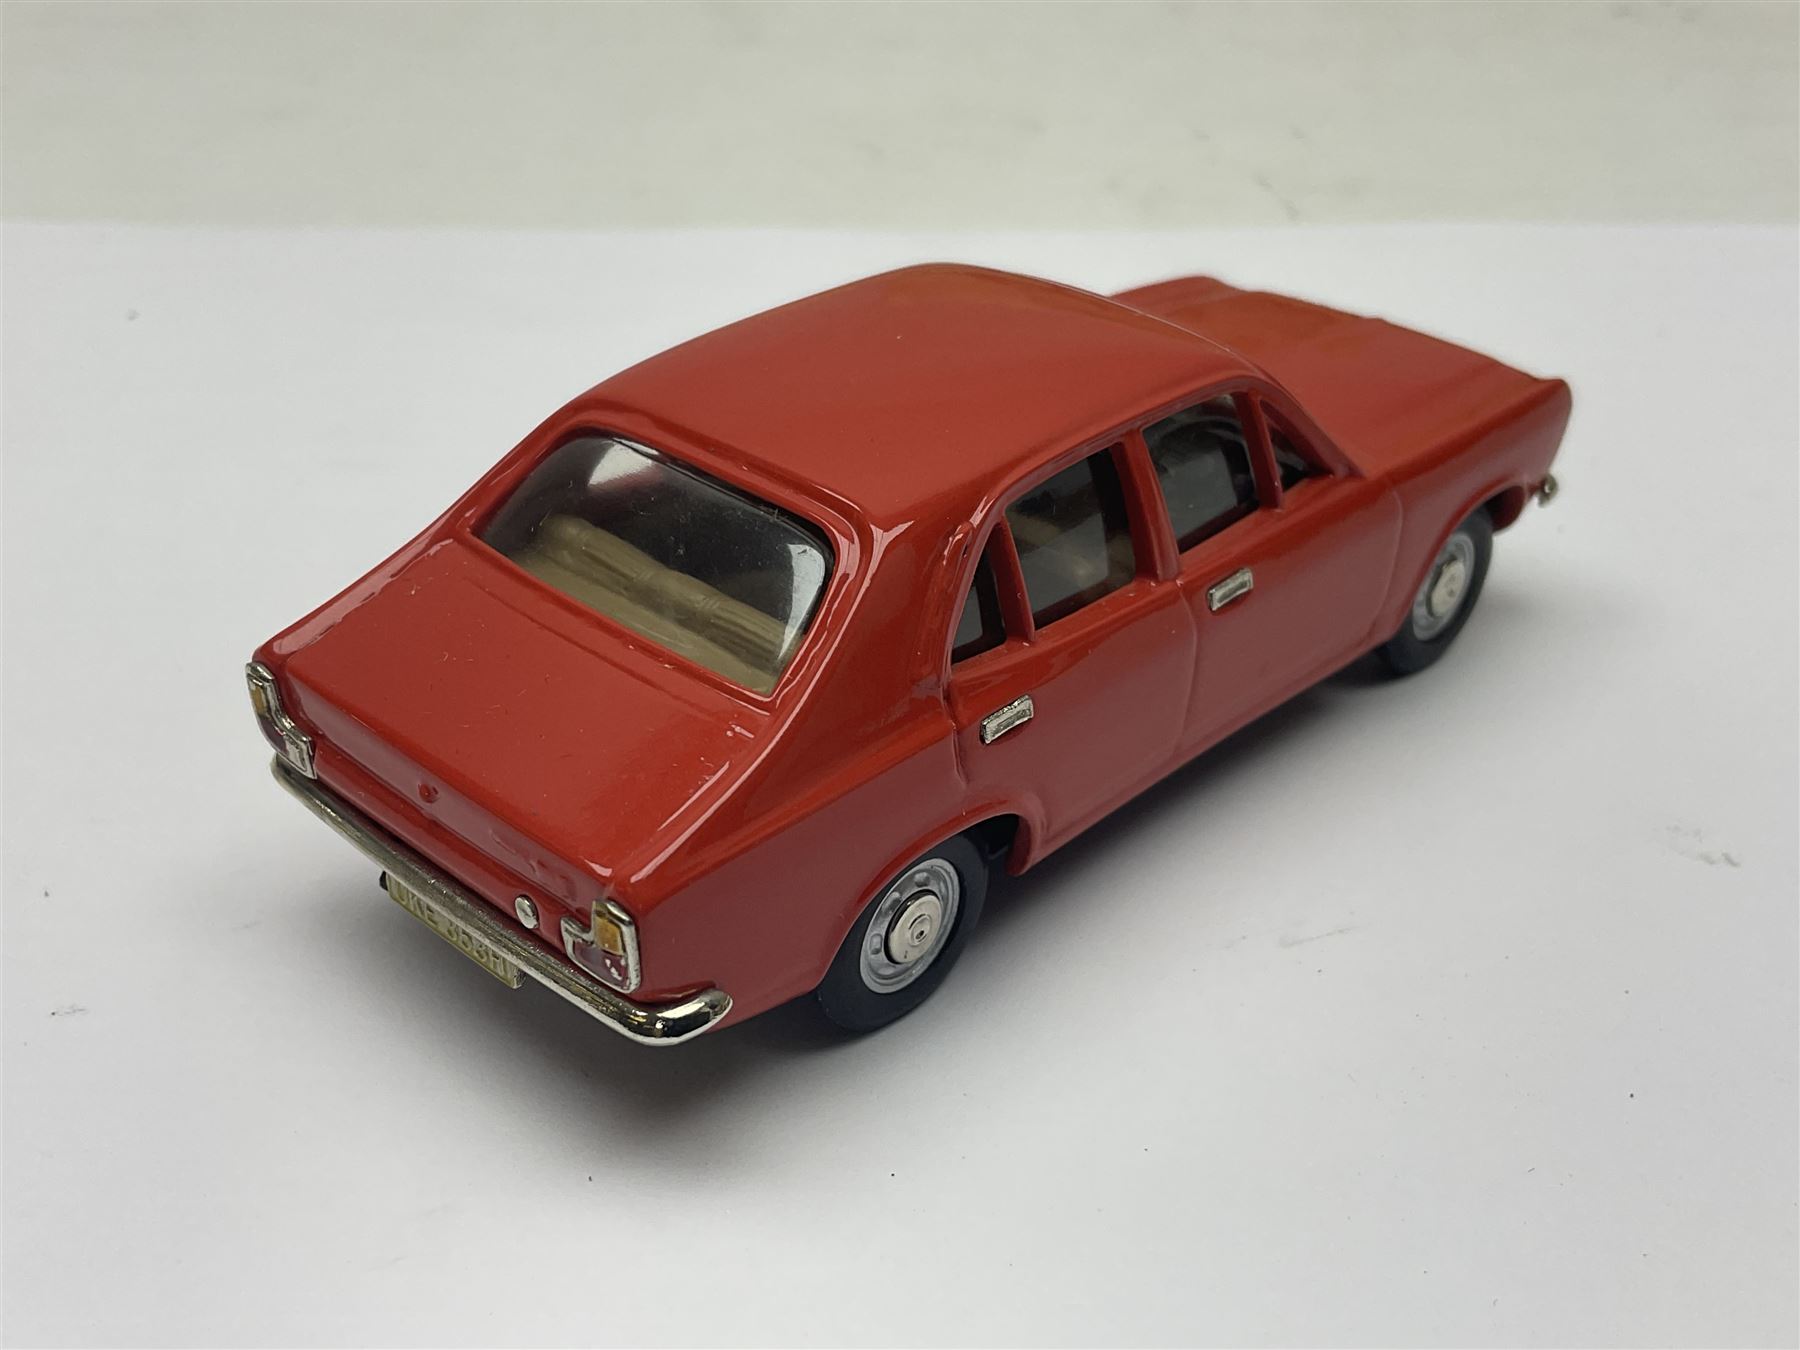 Three Lansdowne Models 1:43 scale models - 1965 Humber Sceptre MkII Four Door Saloon; 1970 Hillman A - Image 3 of 10